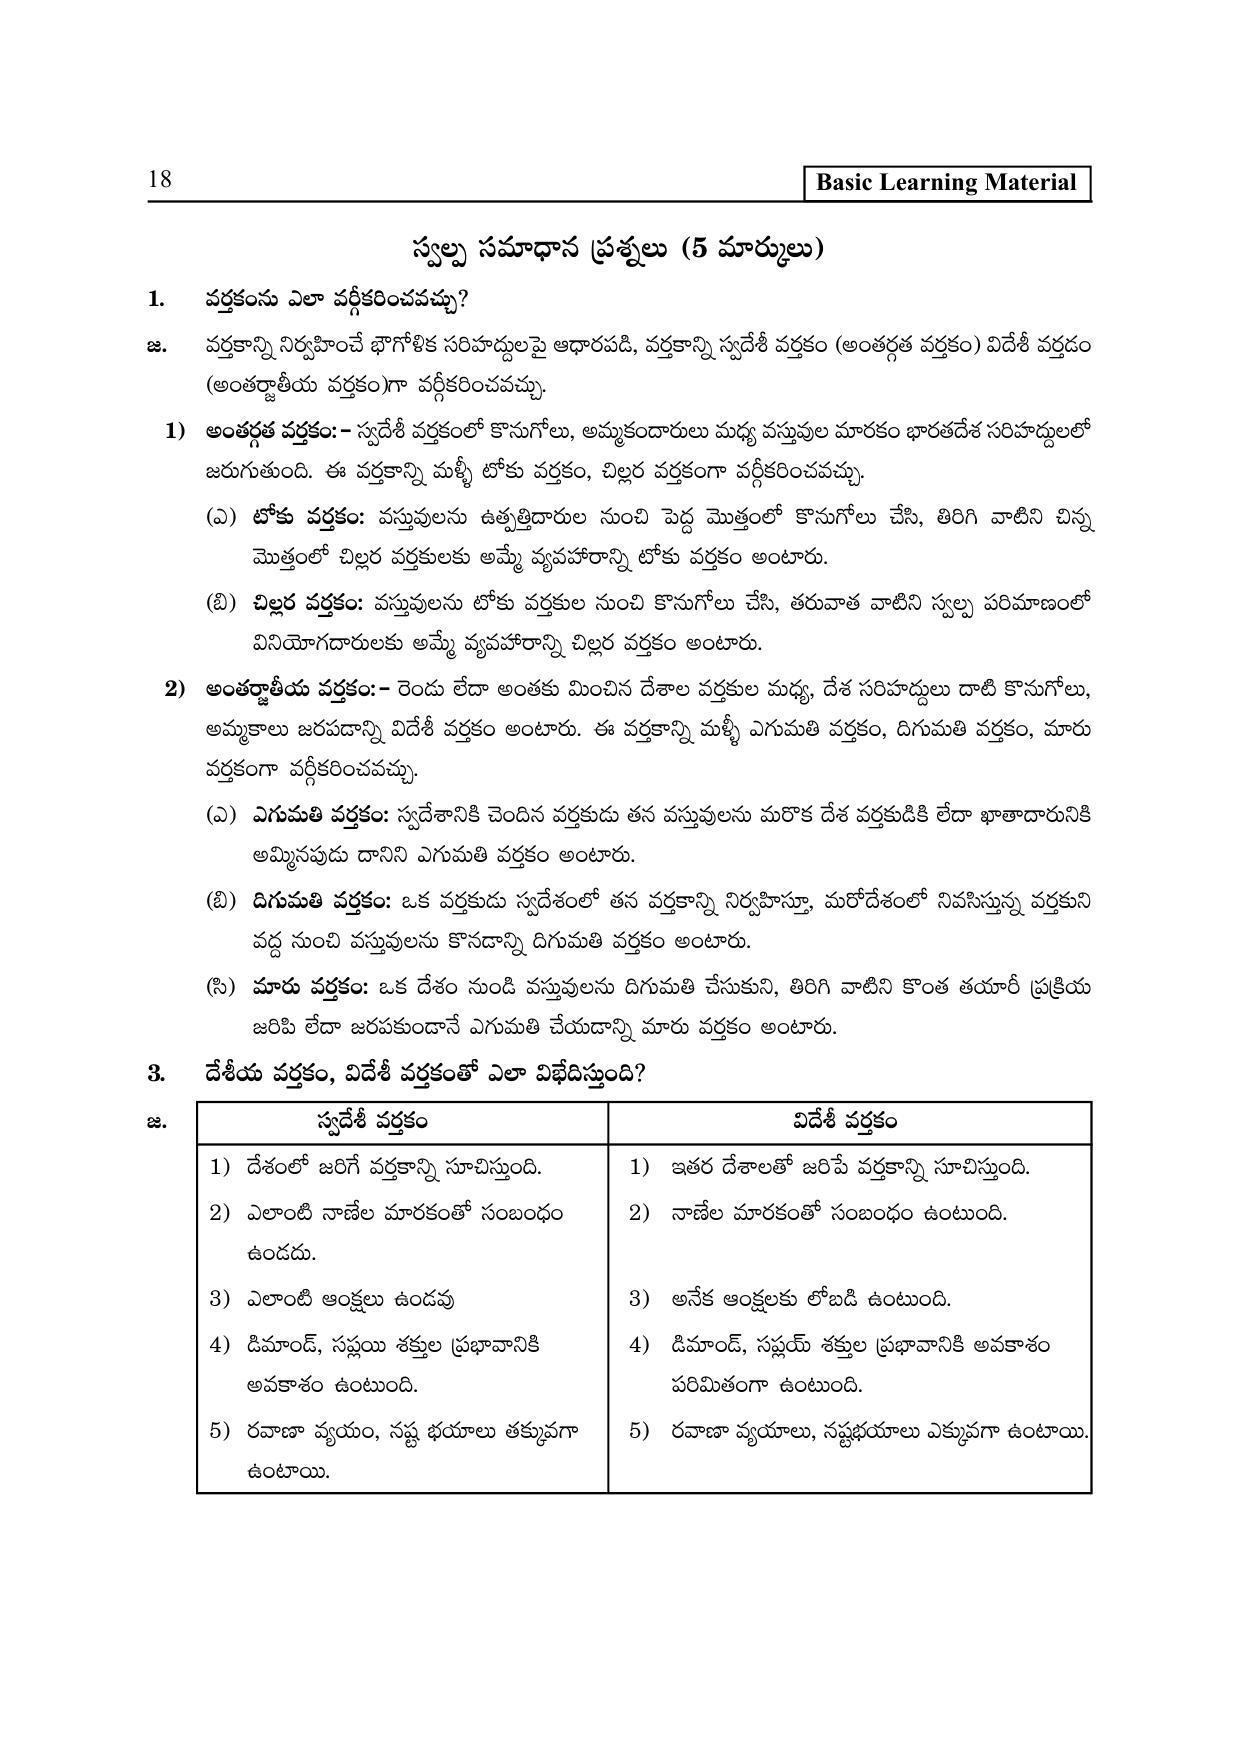 TS SCERT Inter 2nd Year Commerce &Accts II yr TM Path 1 (Telugu Medium) Text Book - Page 23